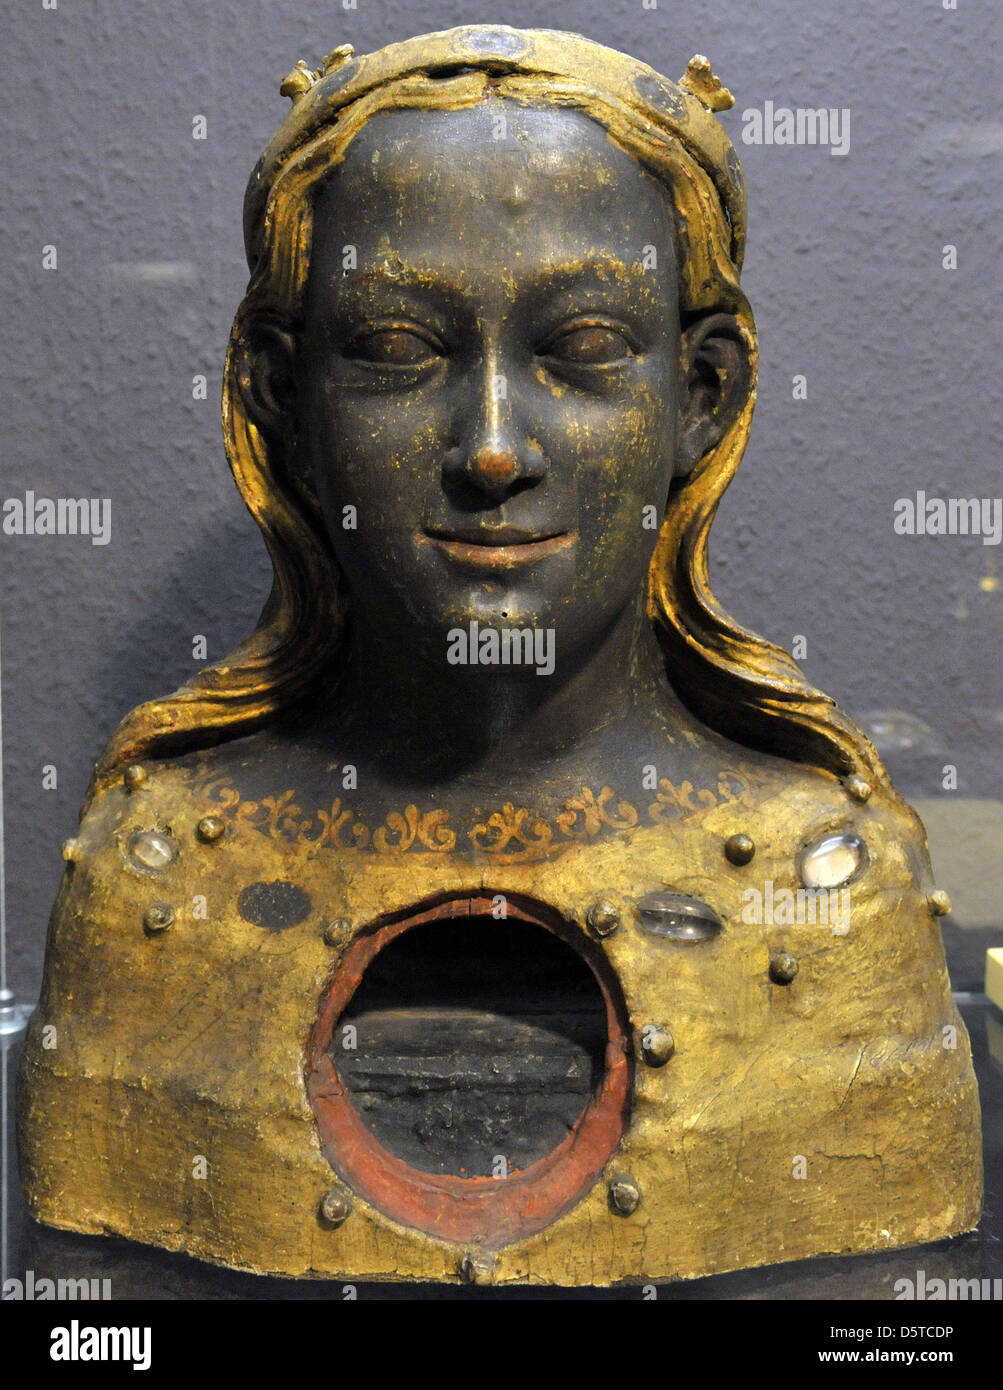 A bust reliquary from the 14th century is on display at the Museum for Thuringian Regional Studies in Erfurt, Germany, 21 November 2012. An exhibition of the precious collection of manuscripts of scholar  Amplonius Rating de Berka (around 1365 - 1435) will take place from 24 November 2012 til 01 April 2013. The Bibliotheca Amploniana is considered the biggest remaining collection o Stock Photo